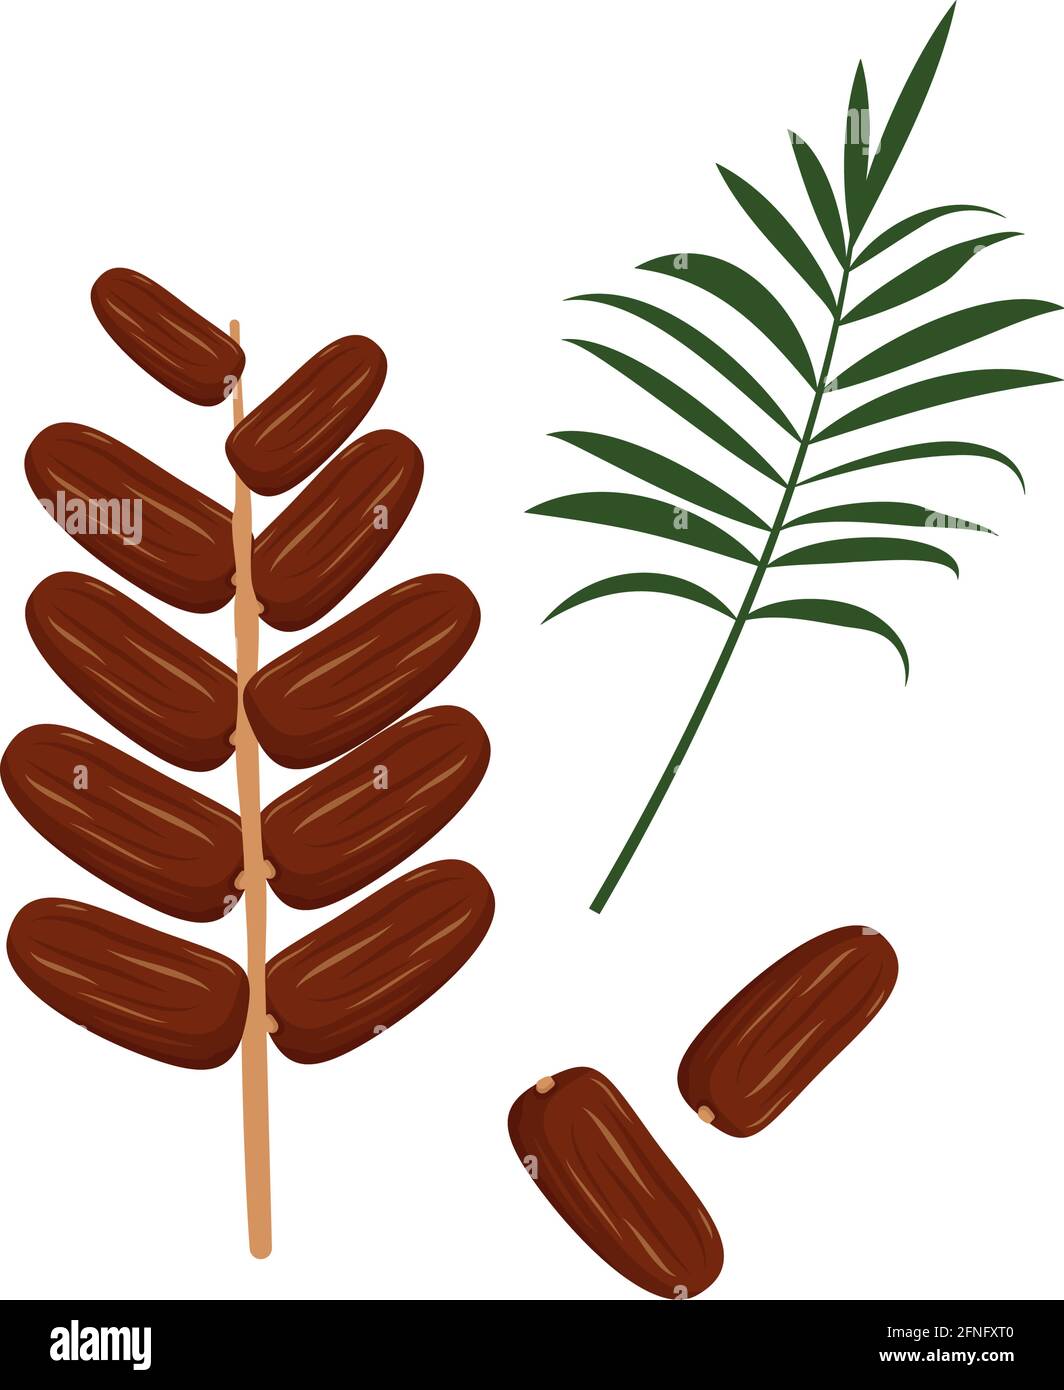 Date fruits and palm branch. Sweet delicious dessert or snack. A source of vitamins, an exotic product Stock Vector